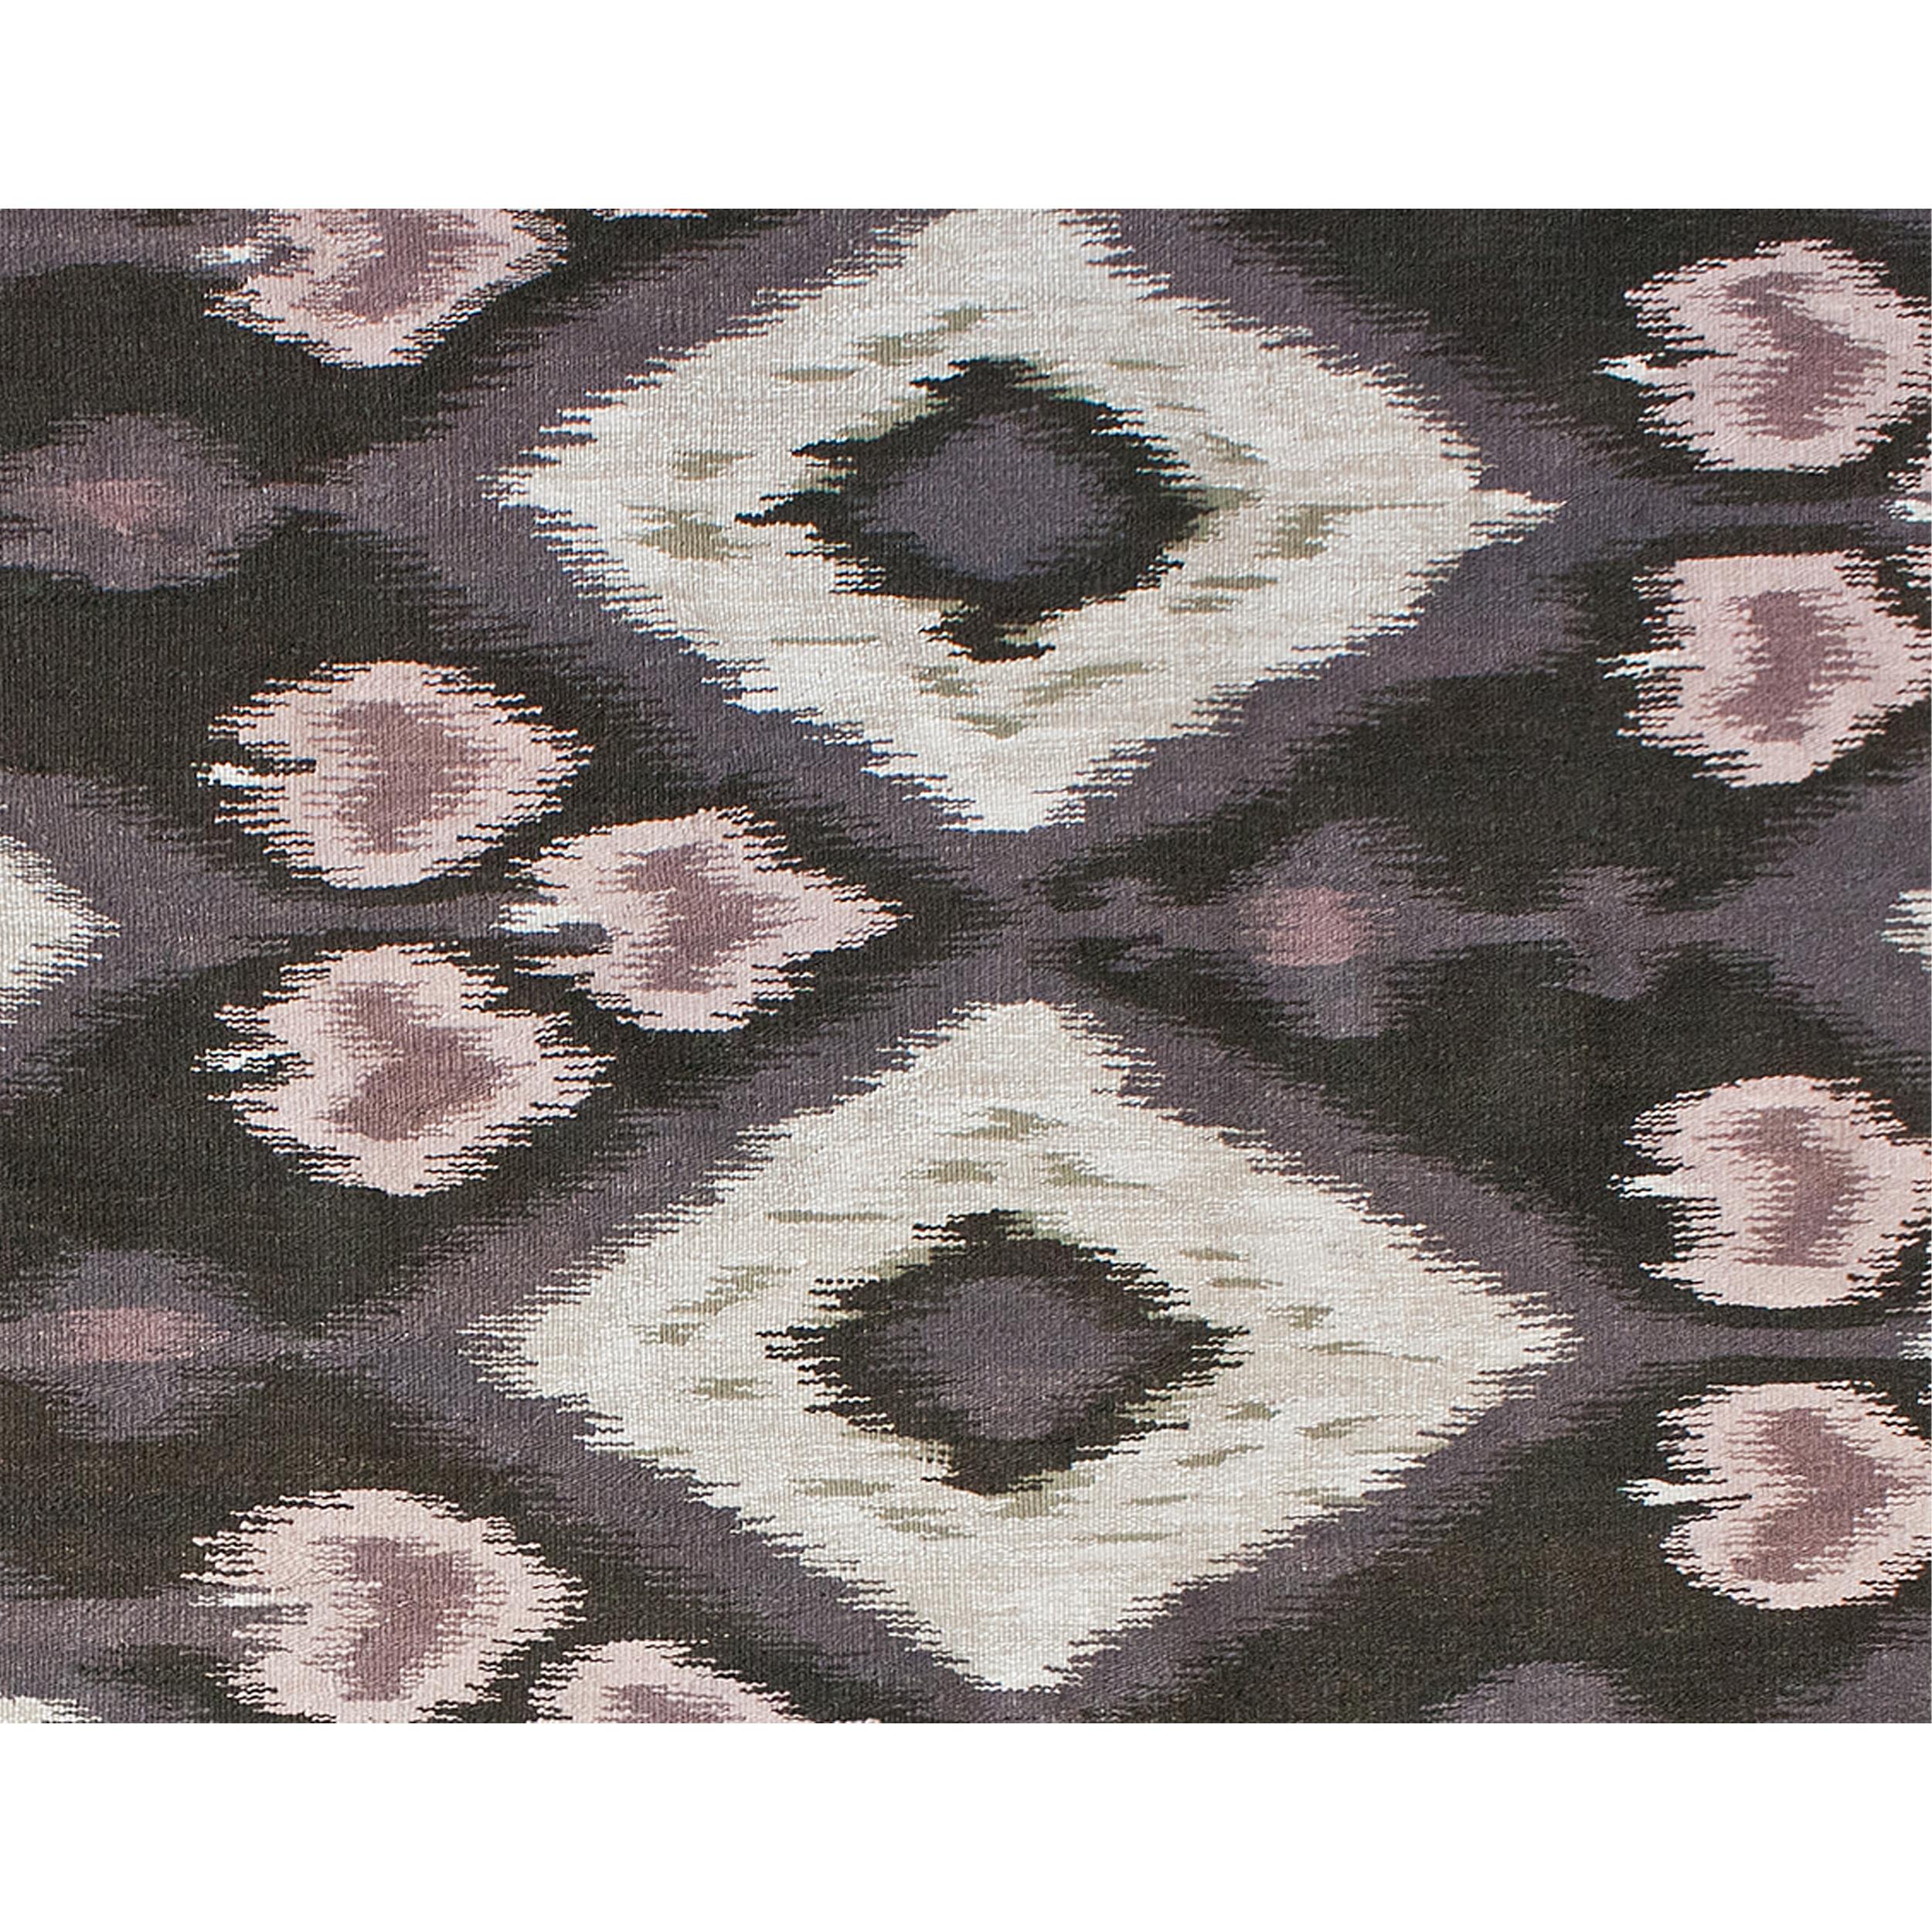 Luxurious modern hand-knotted rug from China, with a unique, one-of-a-kind look that'll present itself to being the finest piece in any home. The minimalist design gives a very modern look, being the perfect complement to any room. This rug is hand